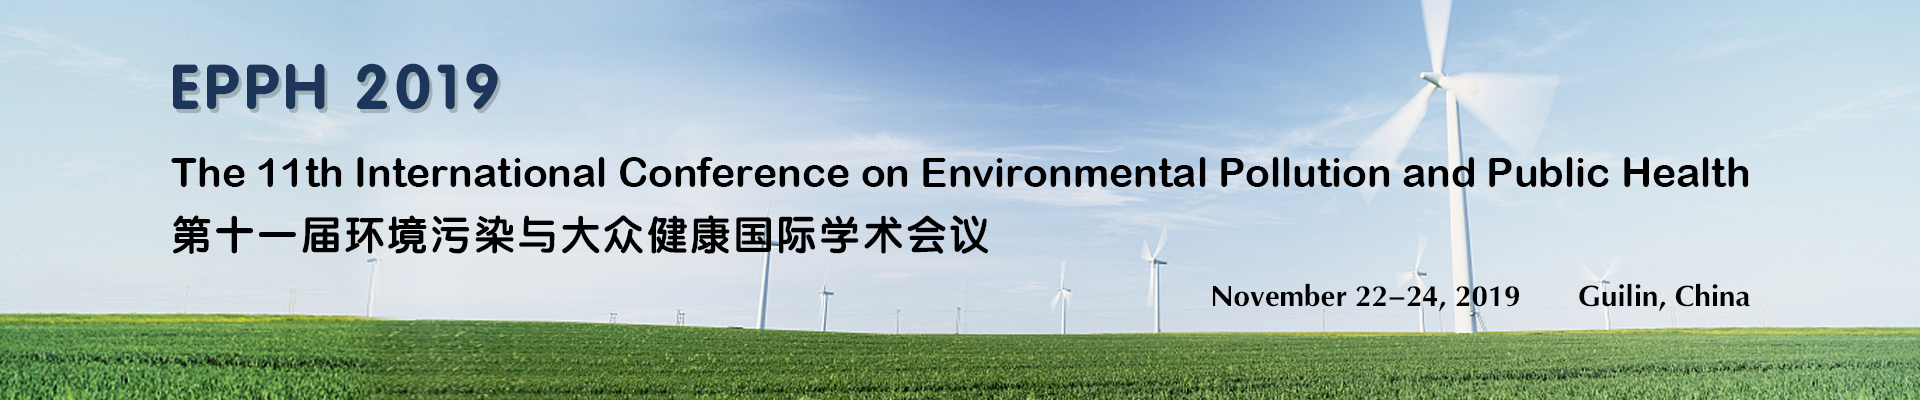 The 11th International Conference on Environmental Pollution and Public Health (EPPH 2019), Guilin, Guangxi, China